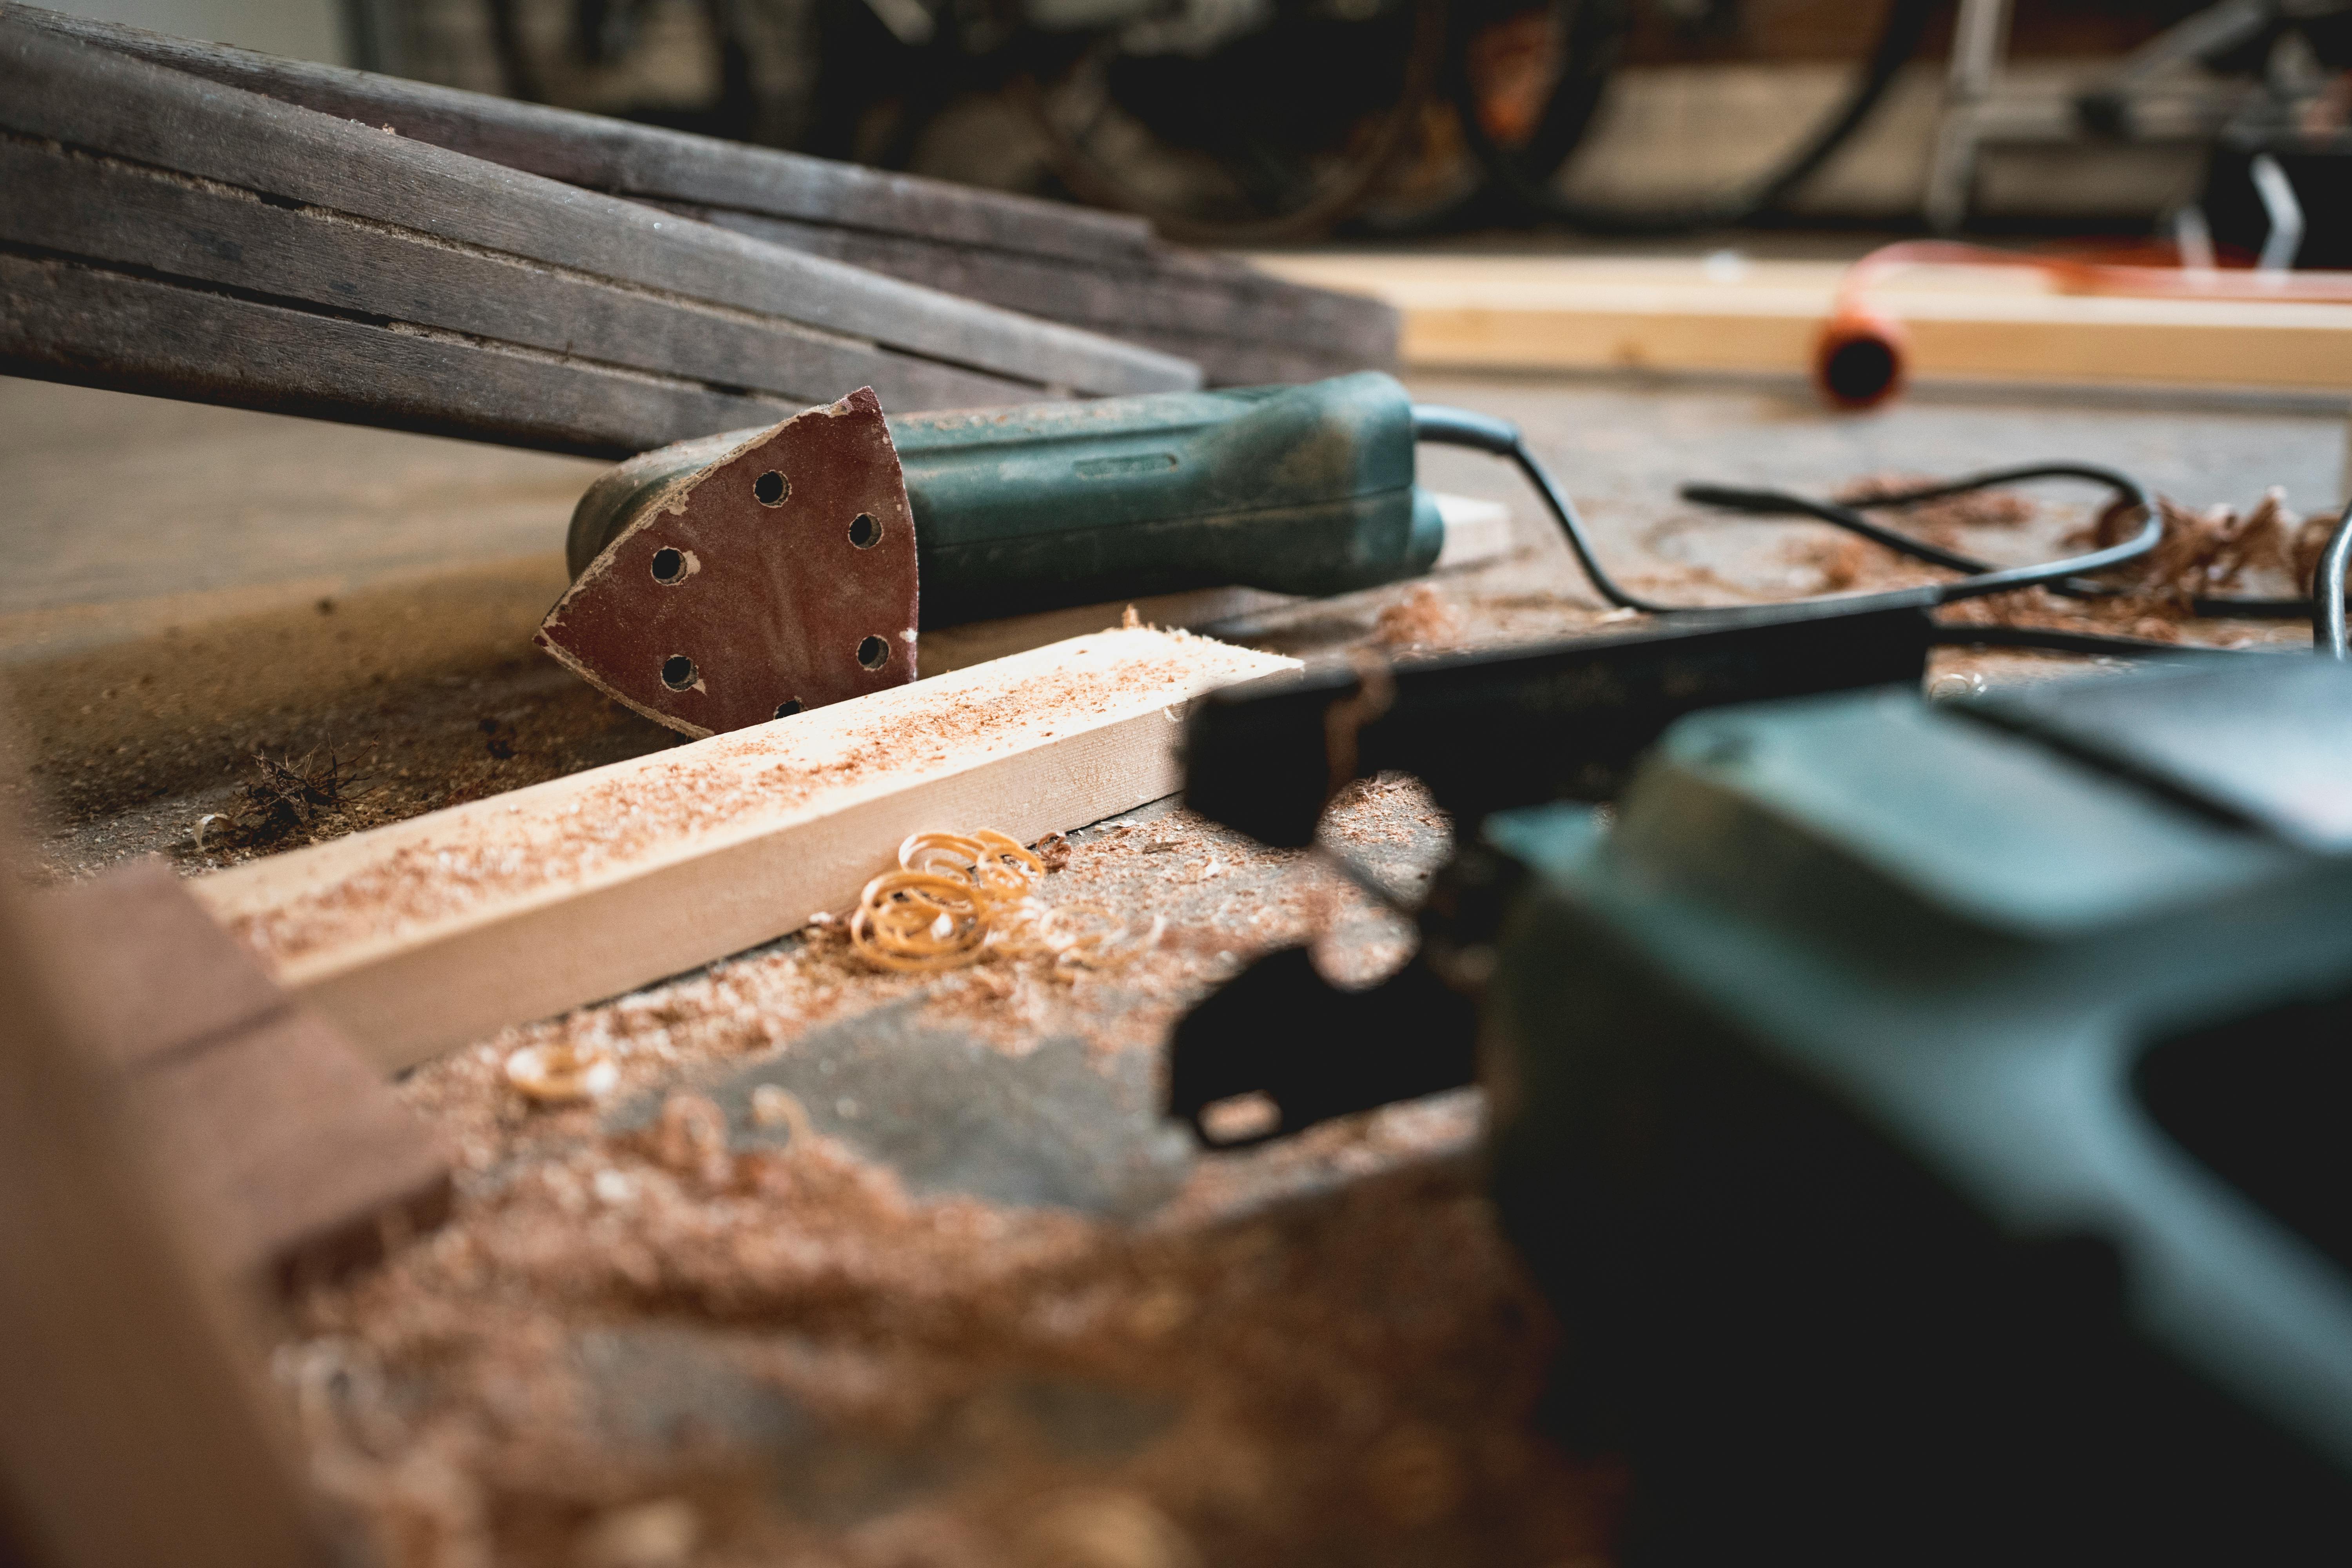 Carpentry work - Stock Image - C037/5462 - Science Photo Library